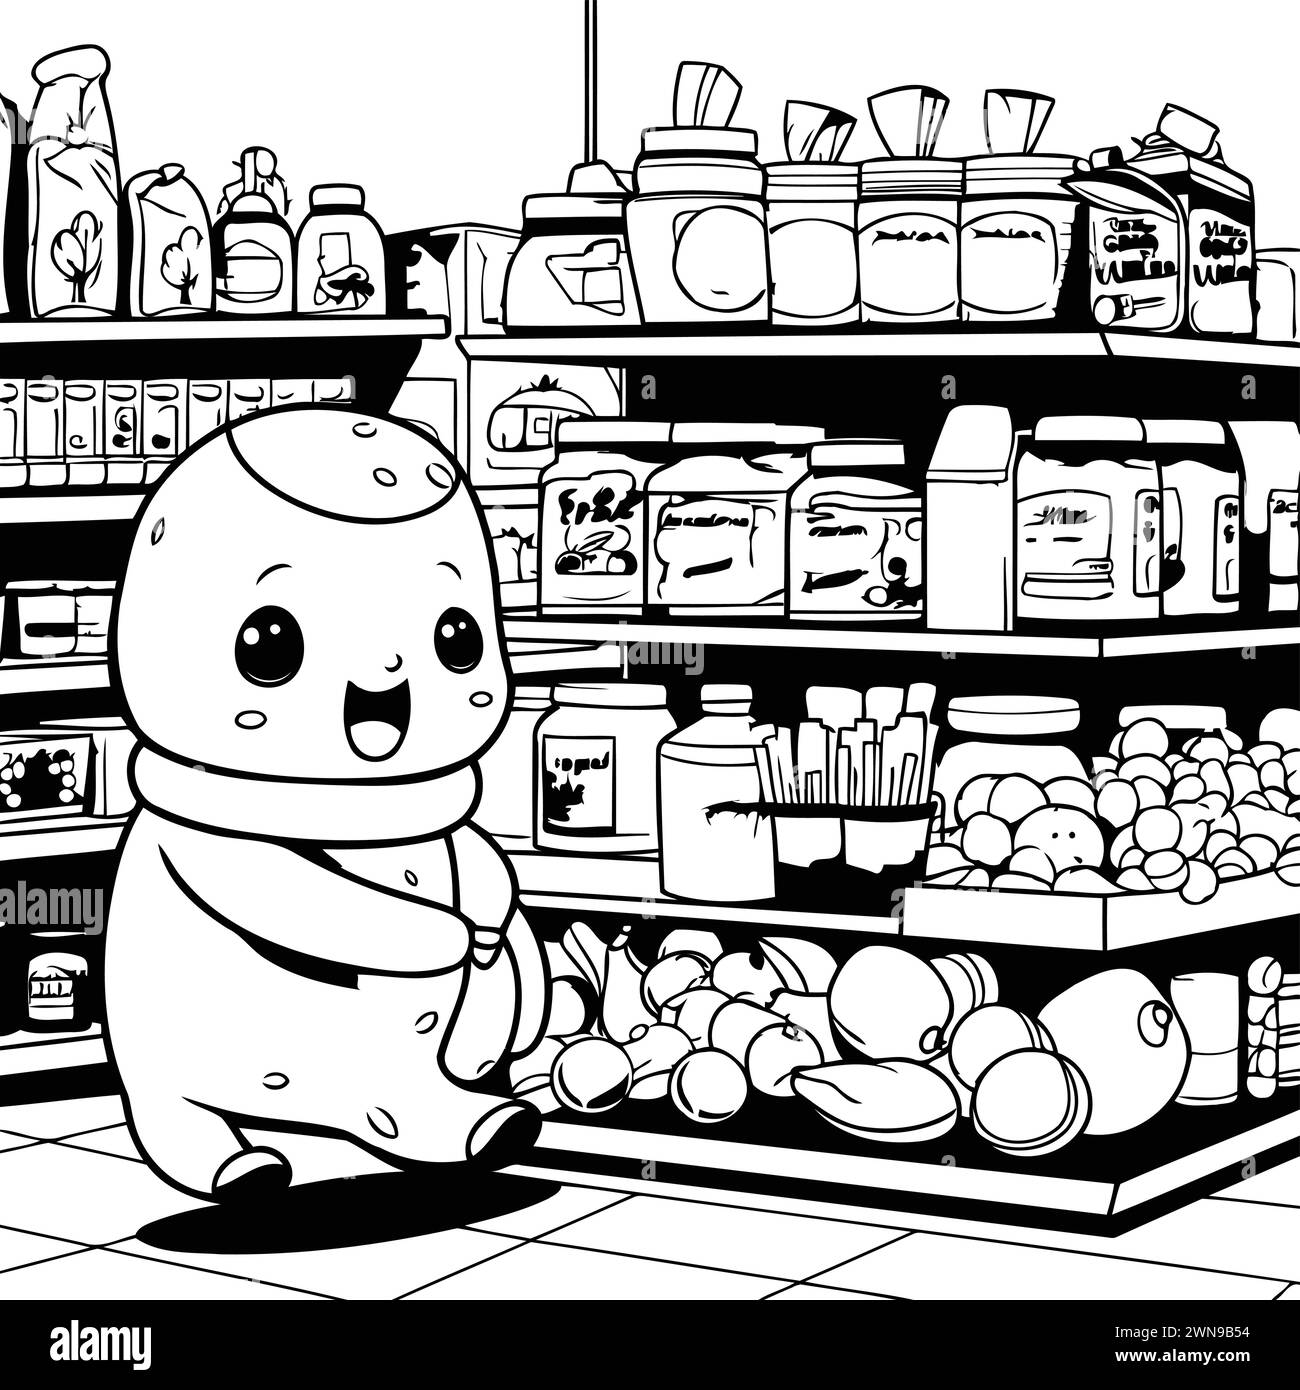 Black and White Cartoon Illustration of Cute Snowman in Grocery Store or Supermarket for Coloring Book Stock Vector